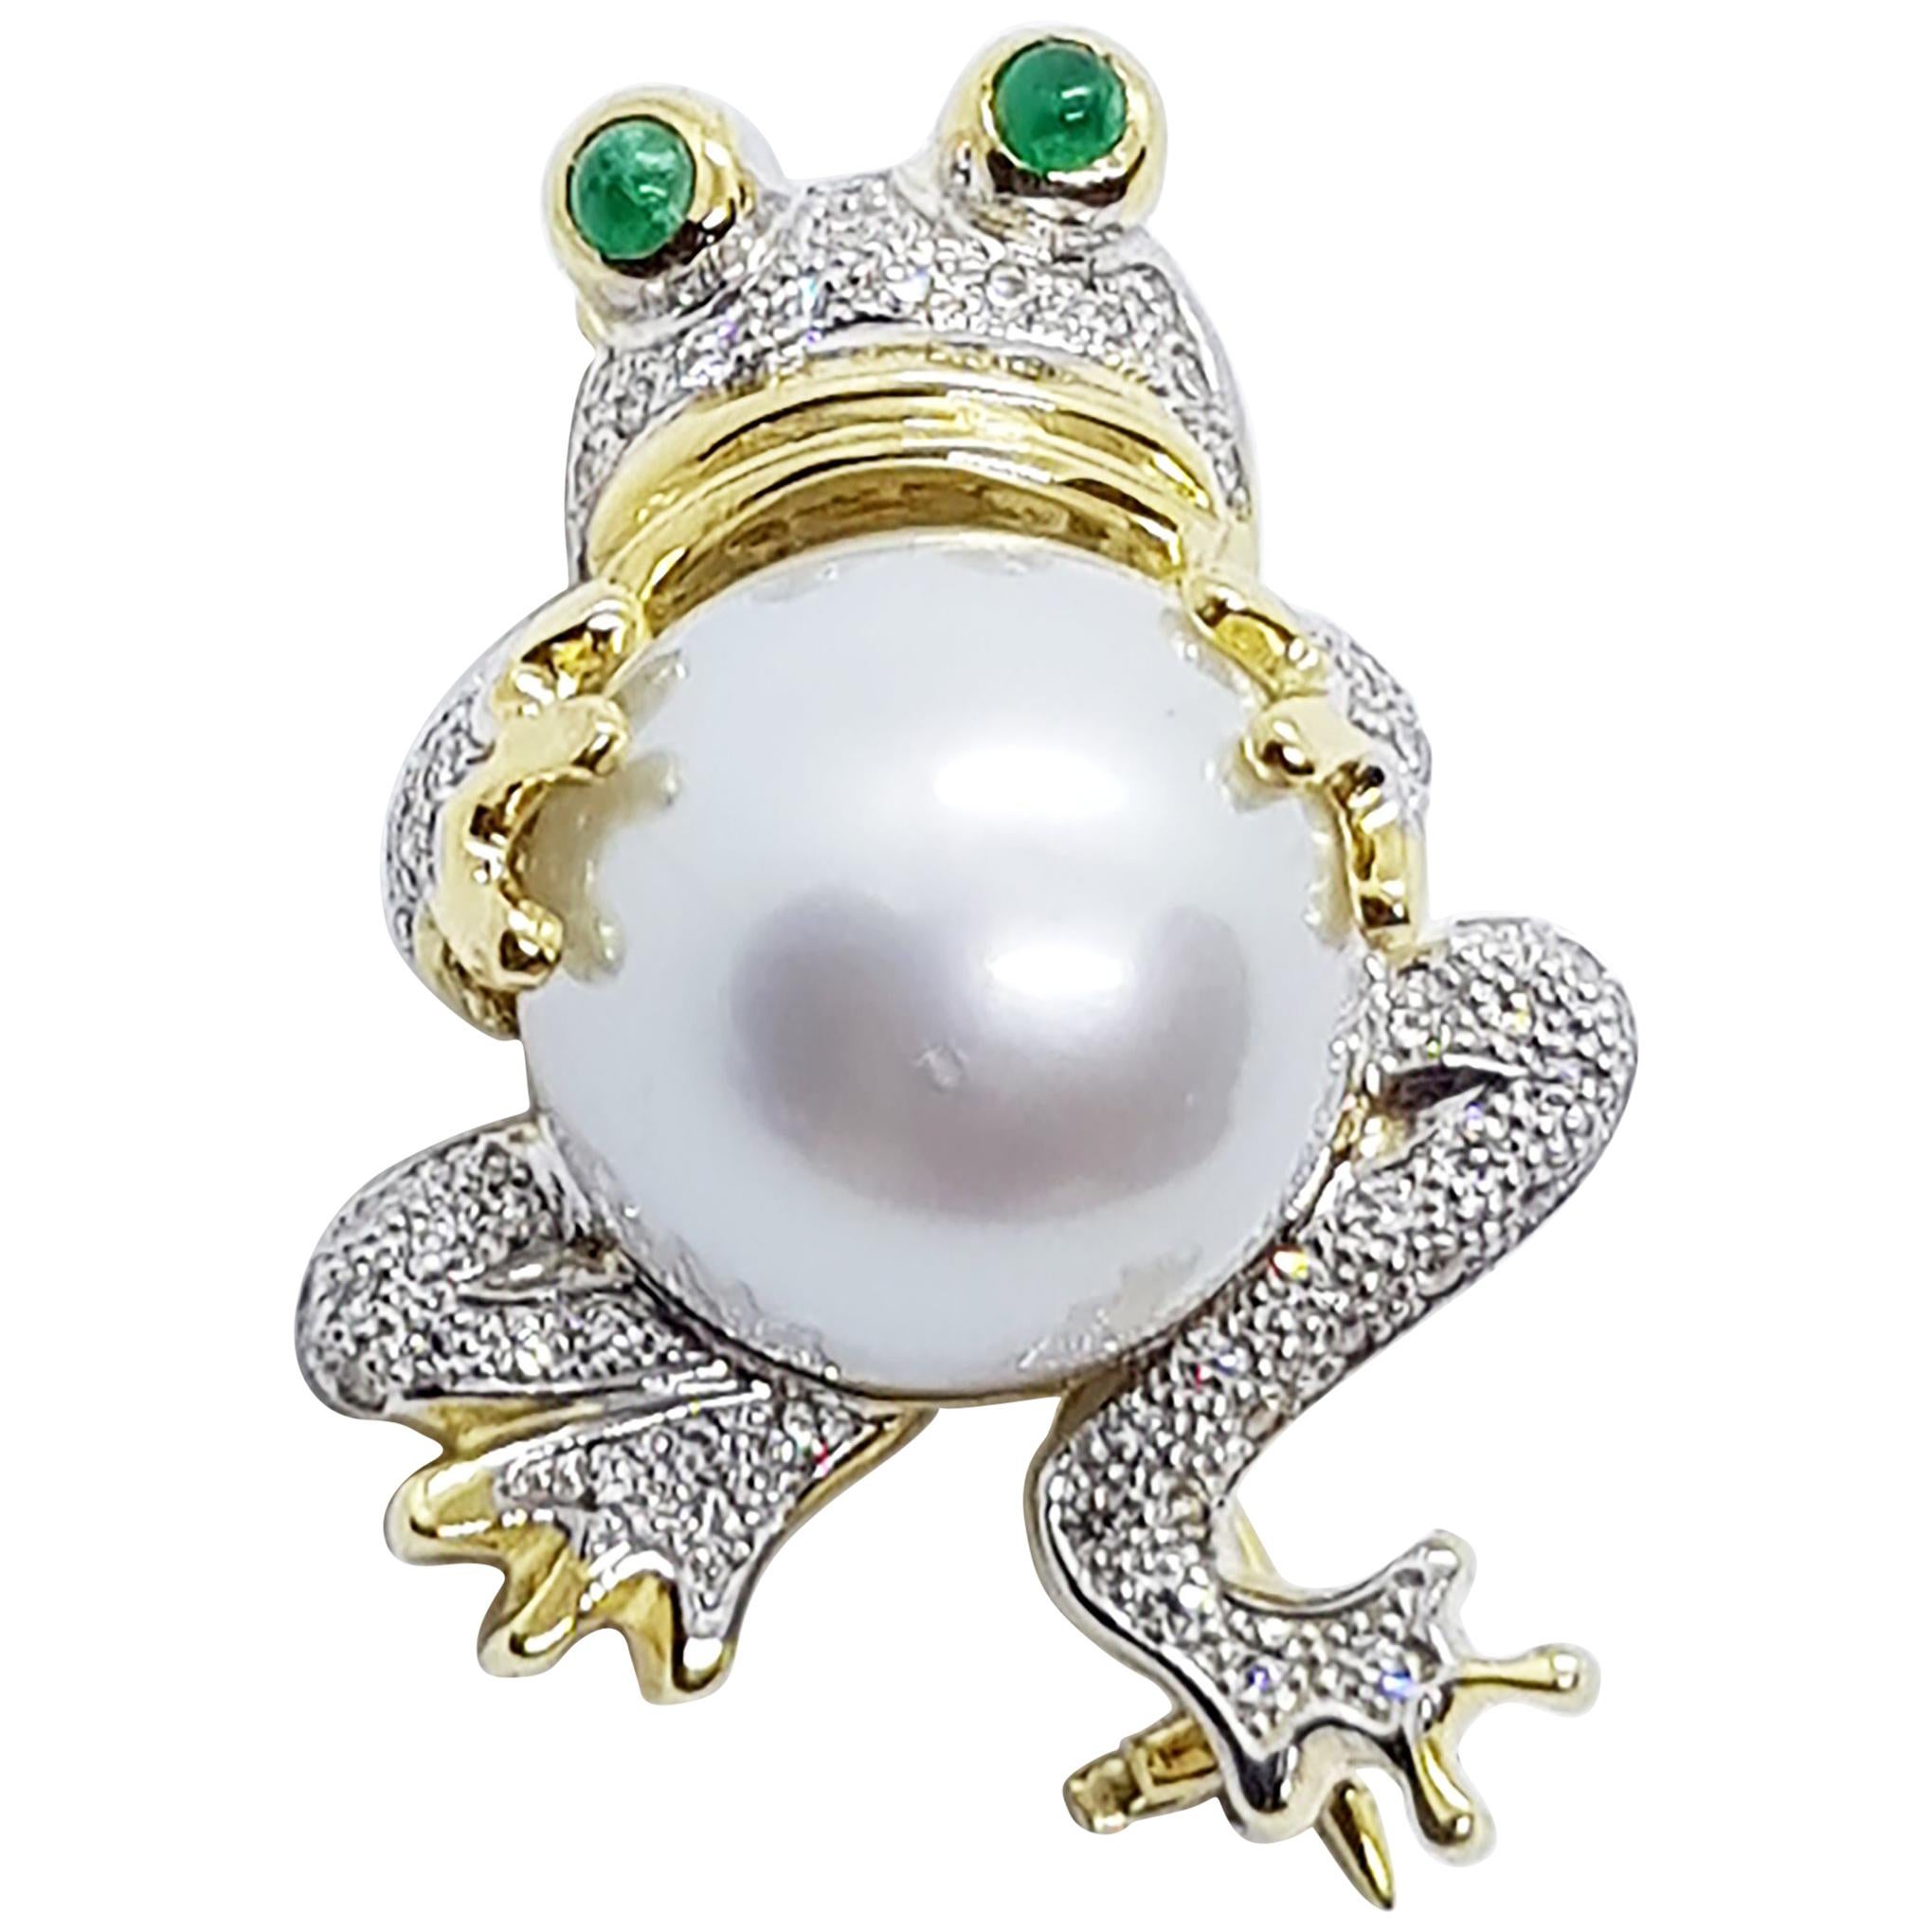 South Sea Pearl with Cabochon Emerald and Diamond Frog Brooch Set in 18K Gold